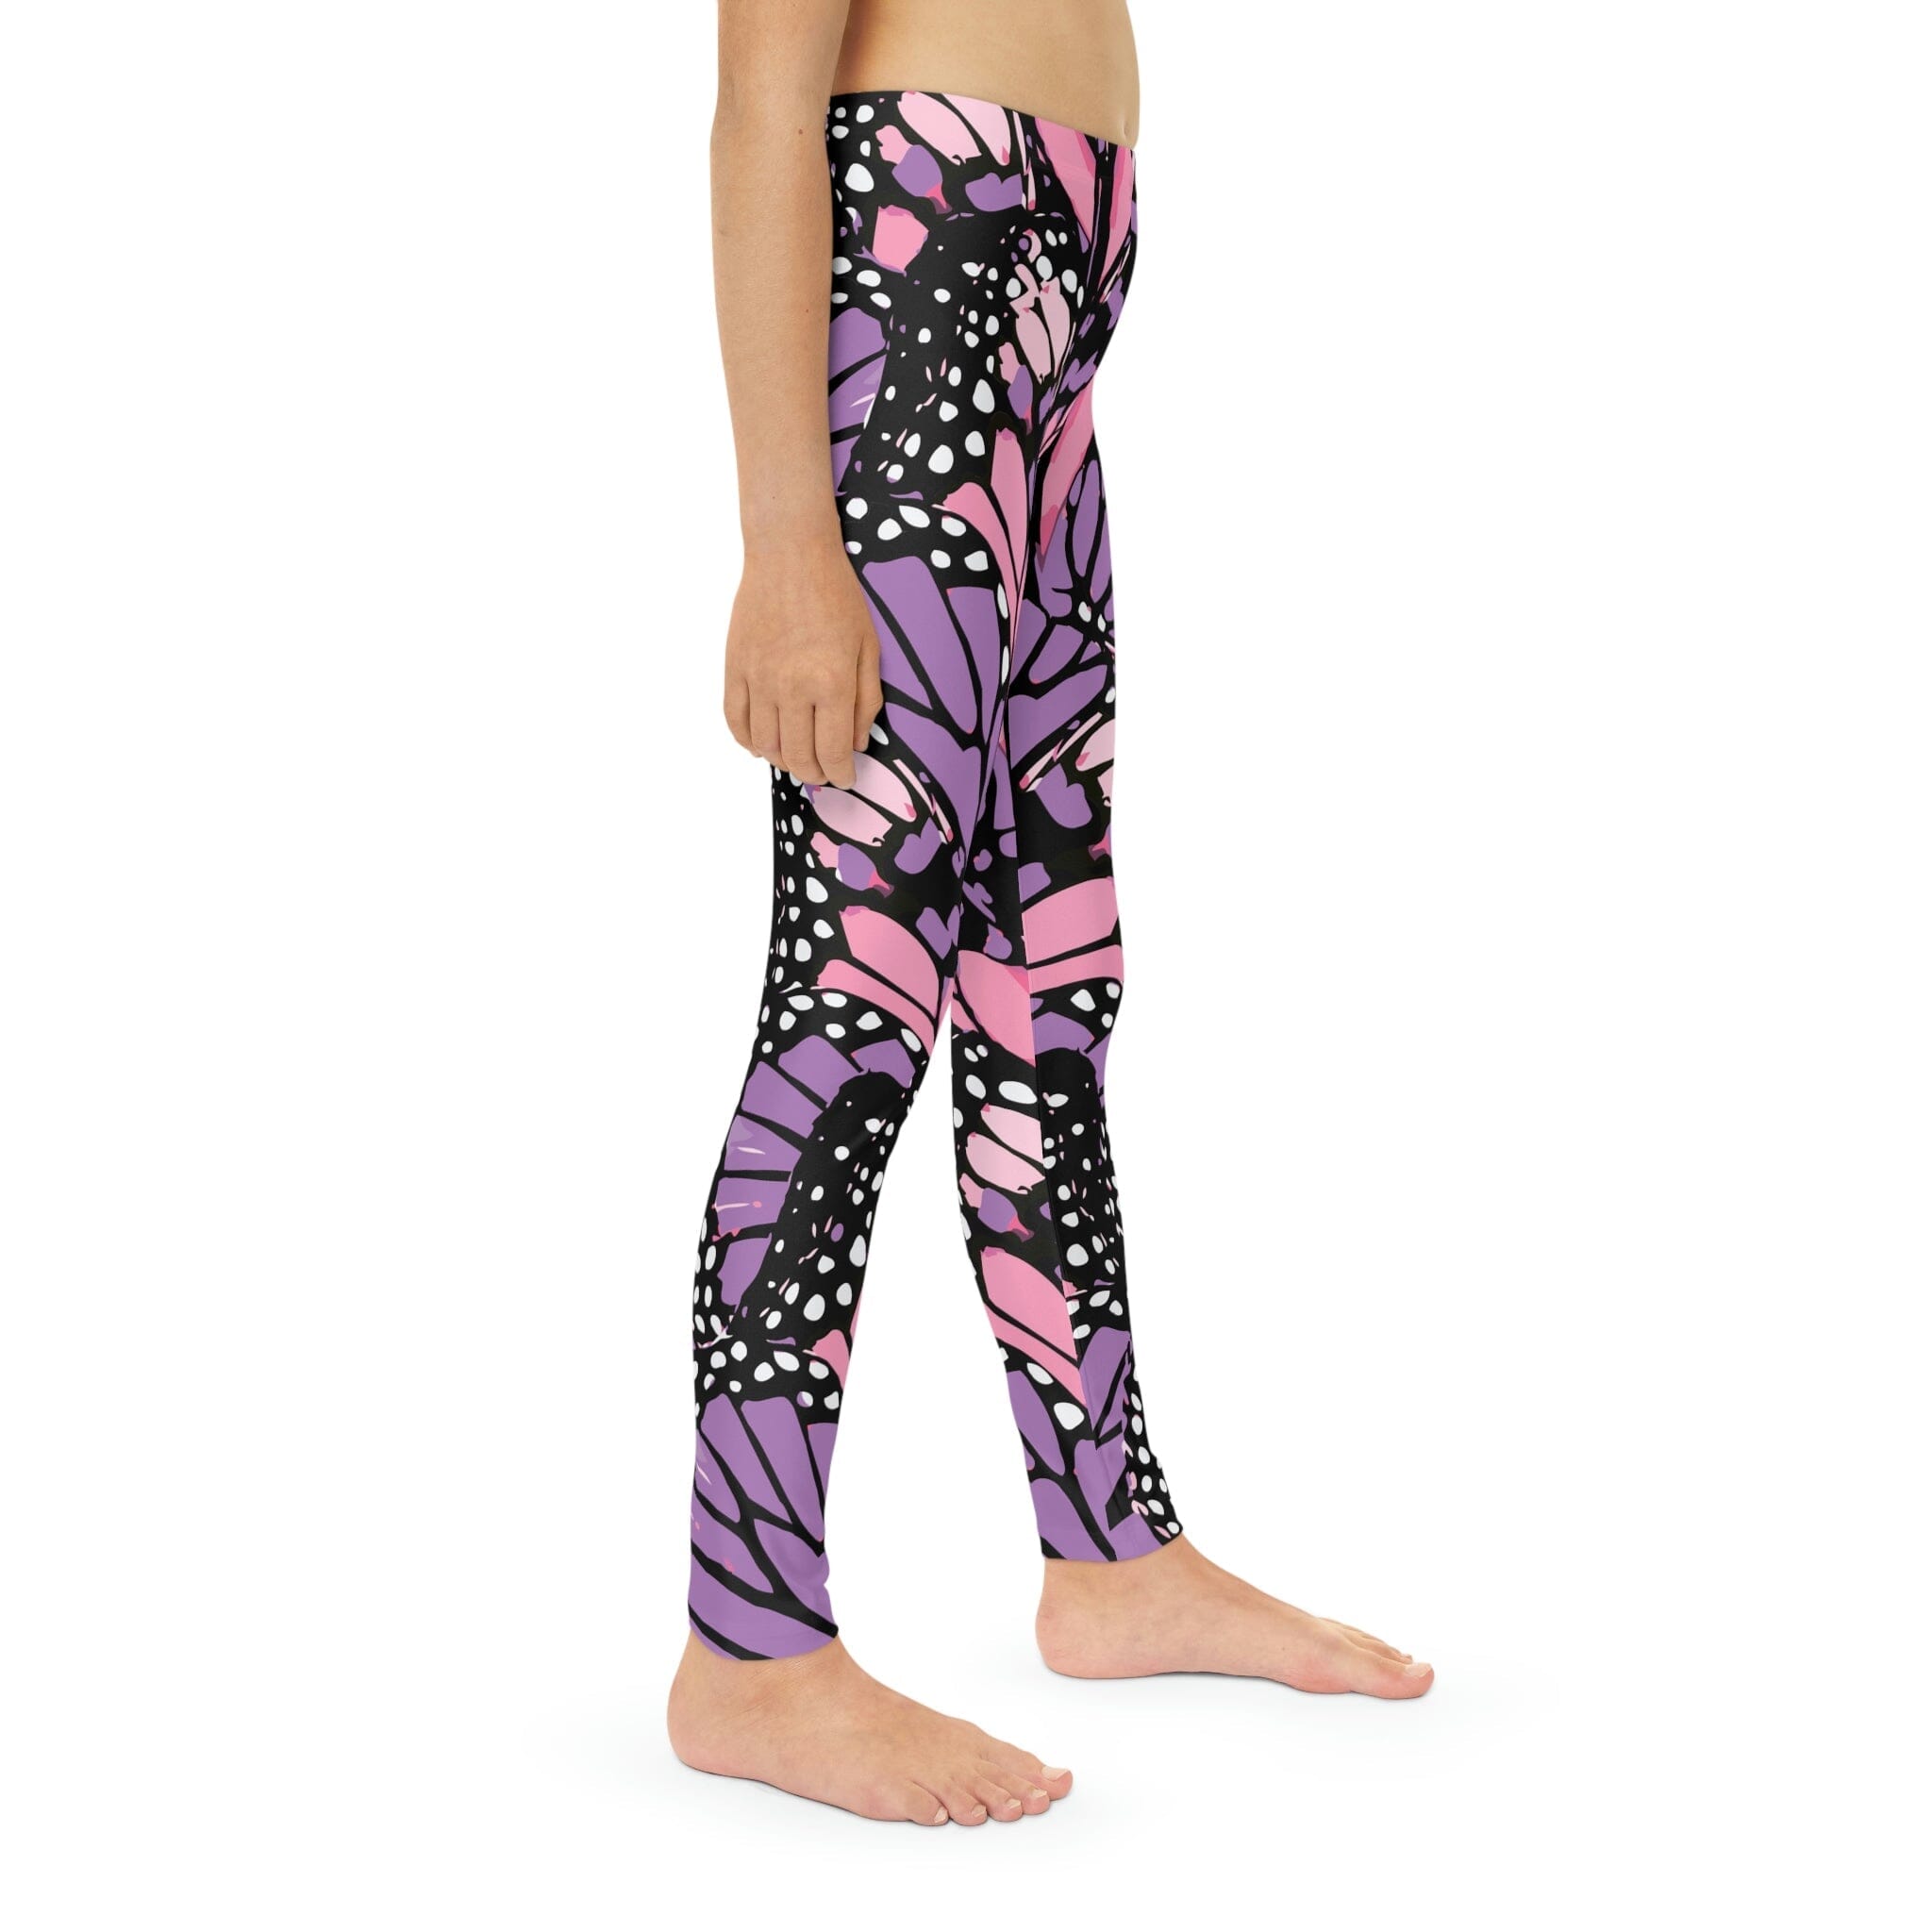 Fulijie Butterfly Leggings For Ladies Free Shipping,Size